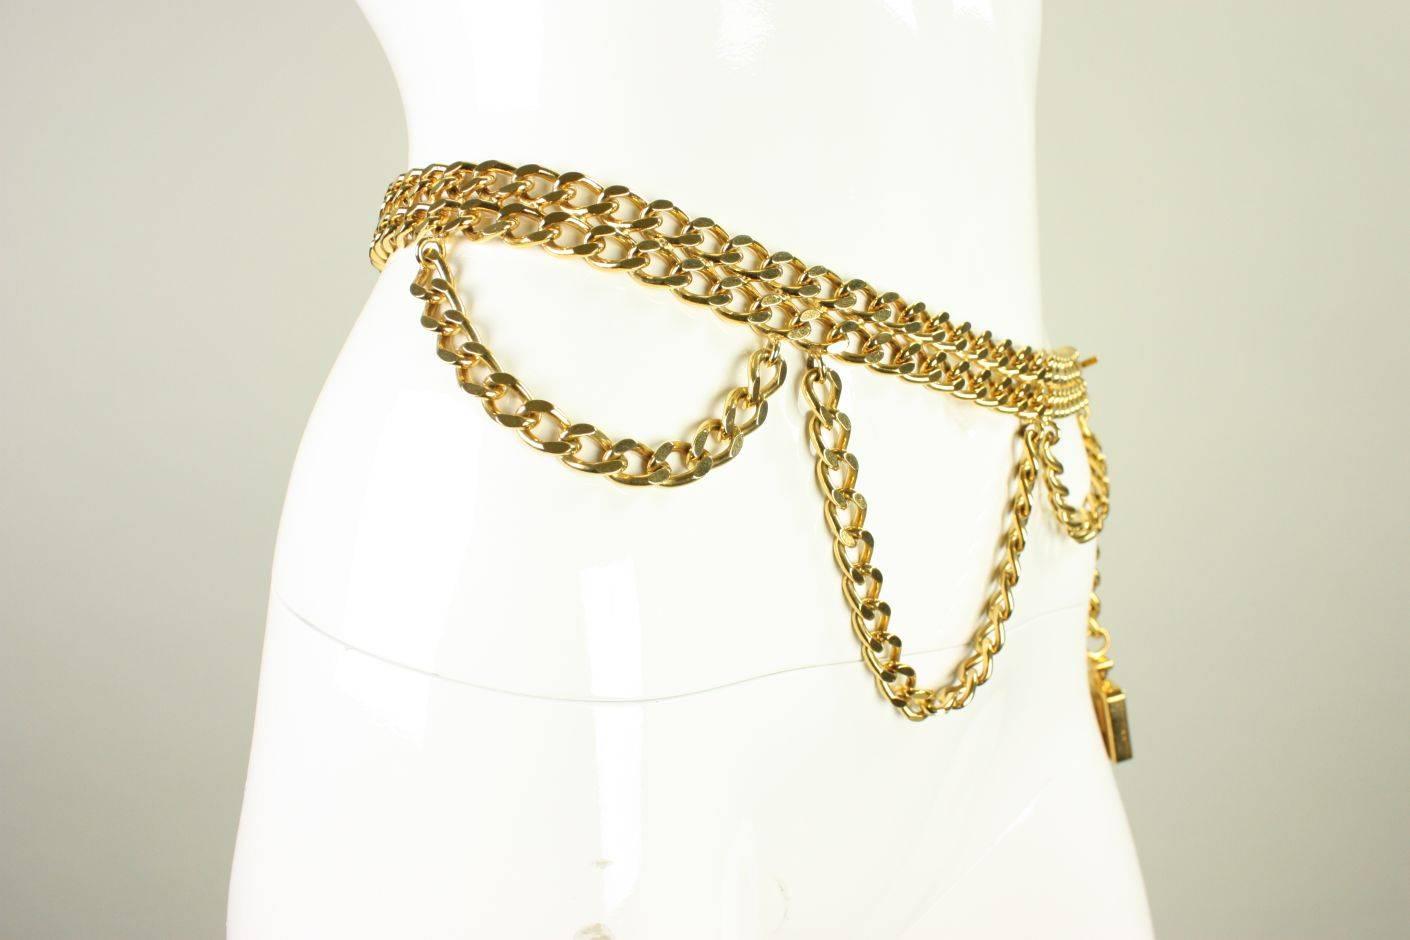 Vintage Chanel gold tone multi-strand chain belt with hook and eye closure and Iconic Coco Chanel No. 9 perfume bottle 5 1/2